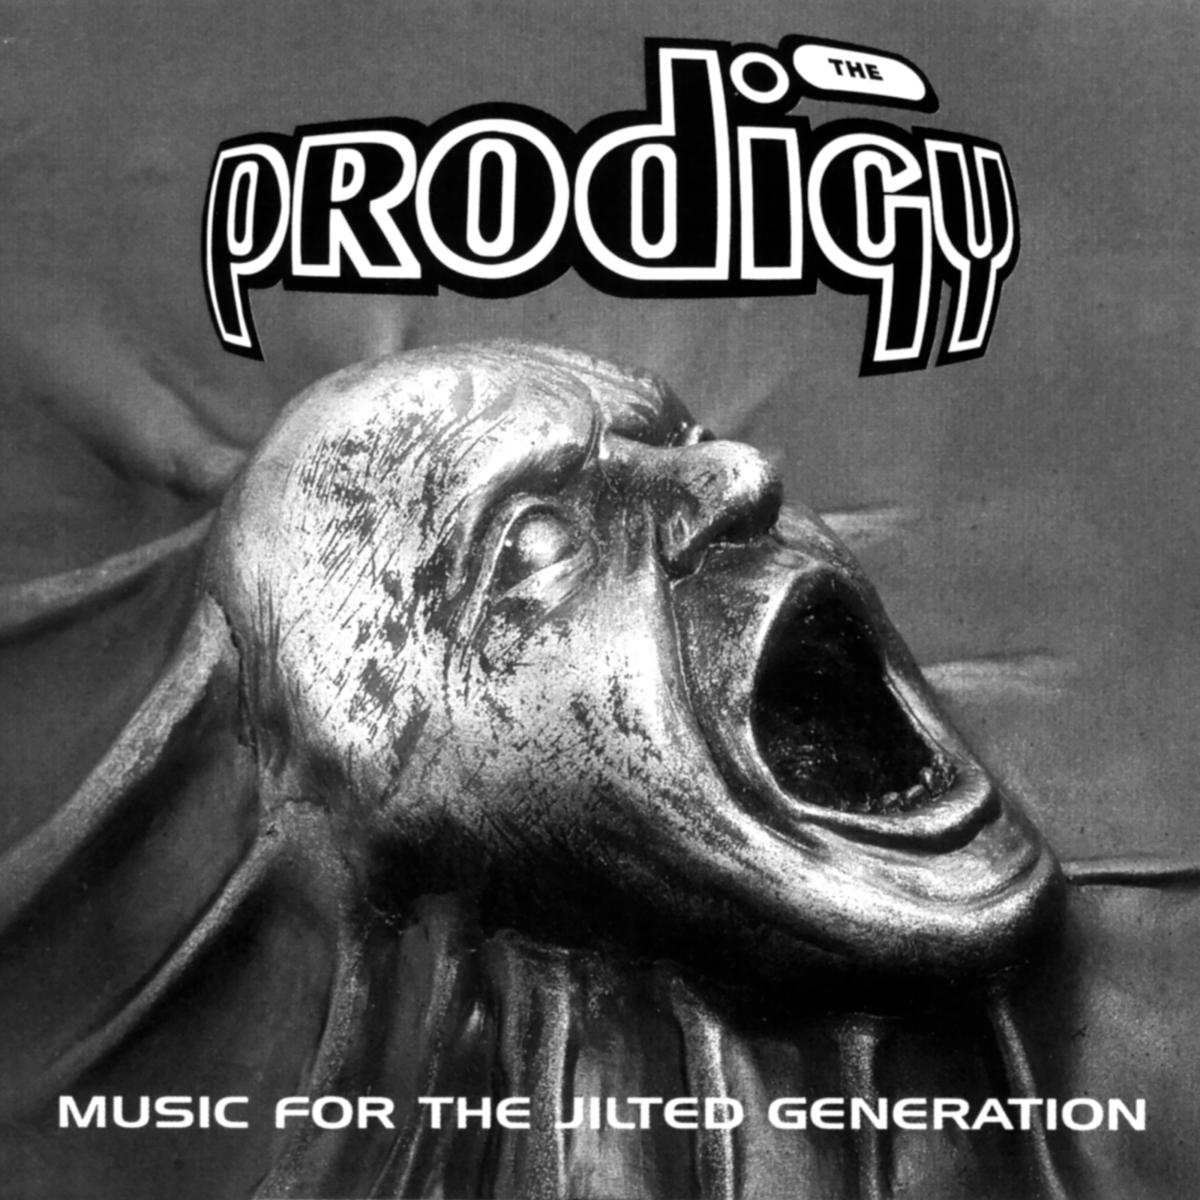 PRODIGY - MUSIC FOR THE JILTED GENERATION Vinyl LP